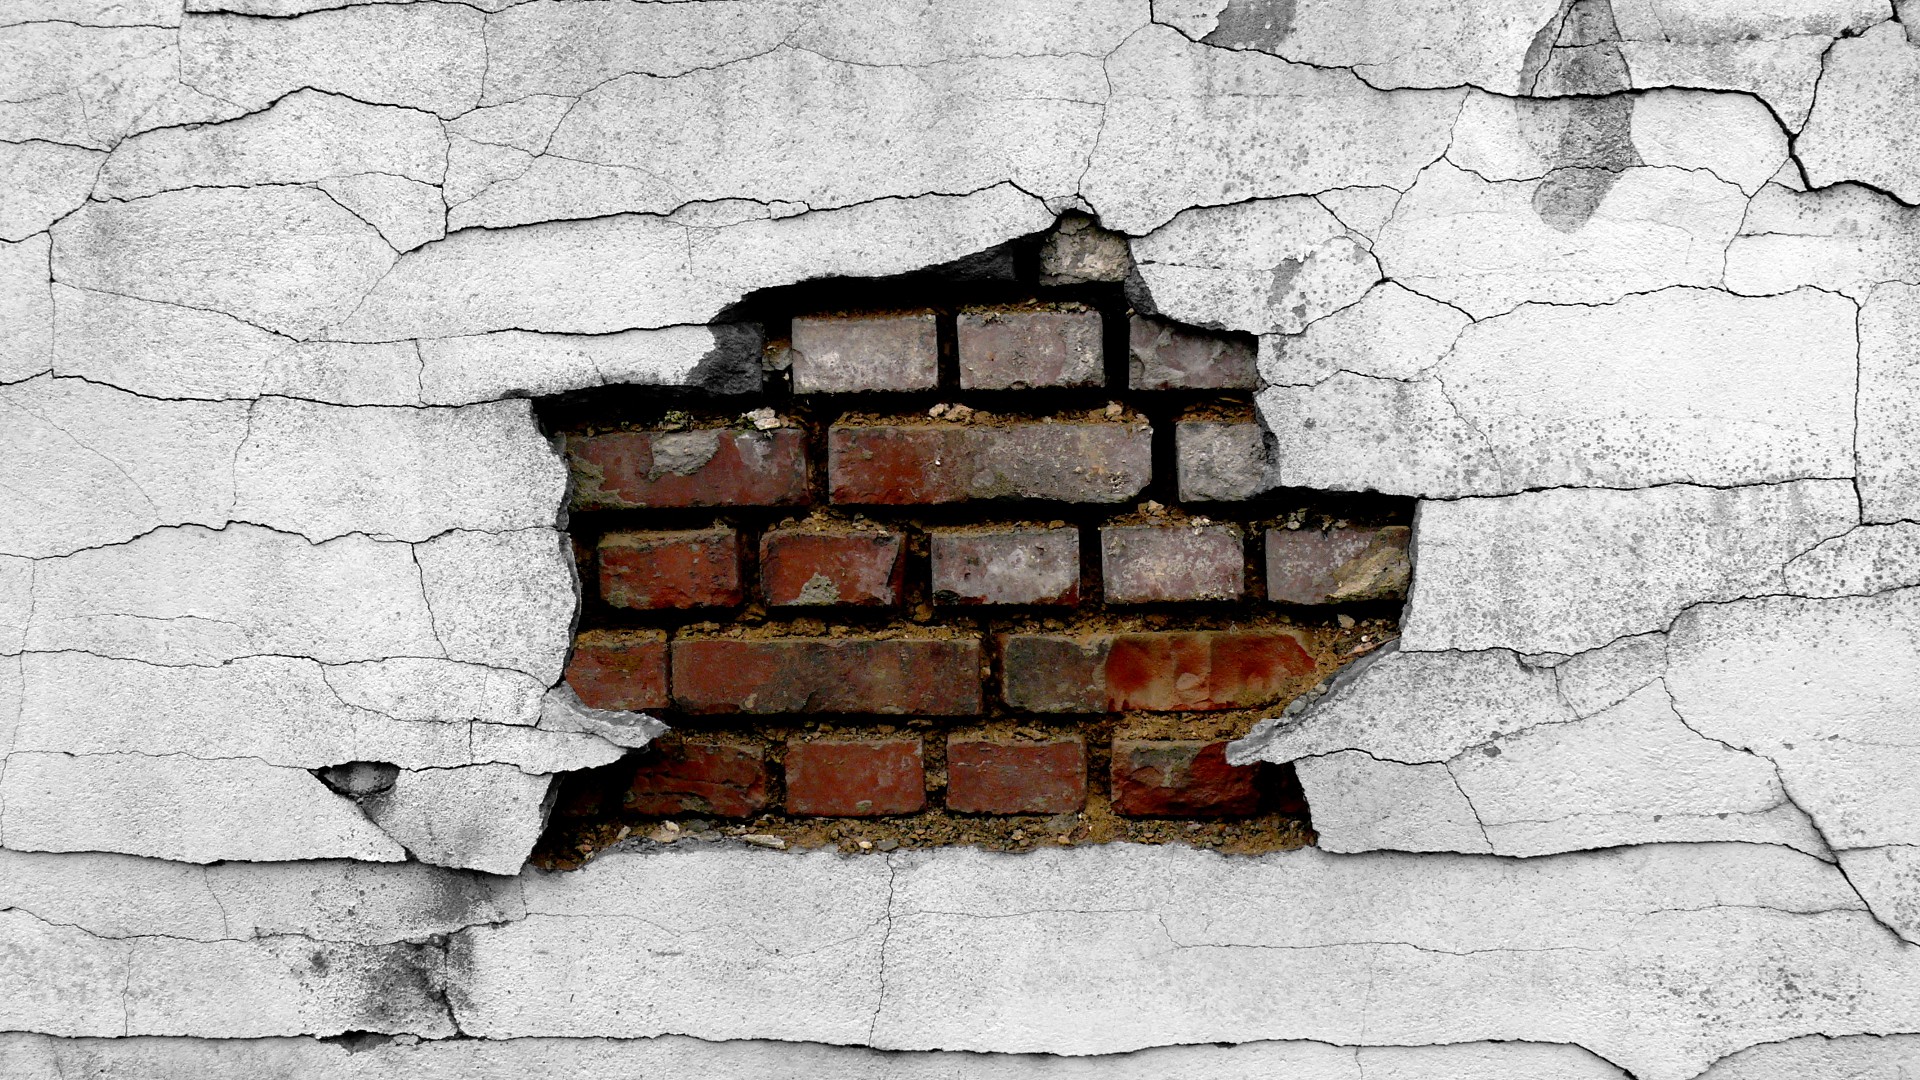 Cracked Brick Wall Drawing at GetDrawings.com | Free for personal ...